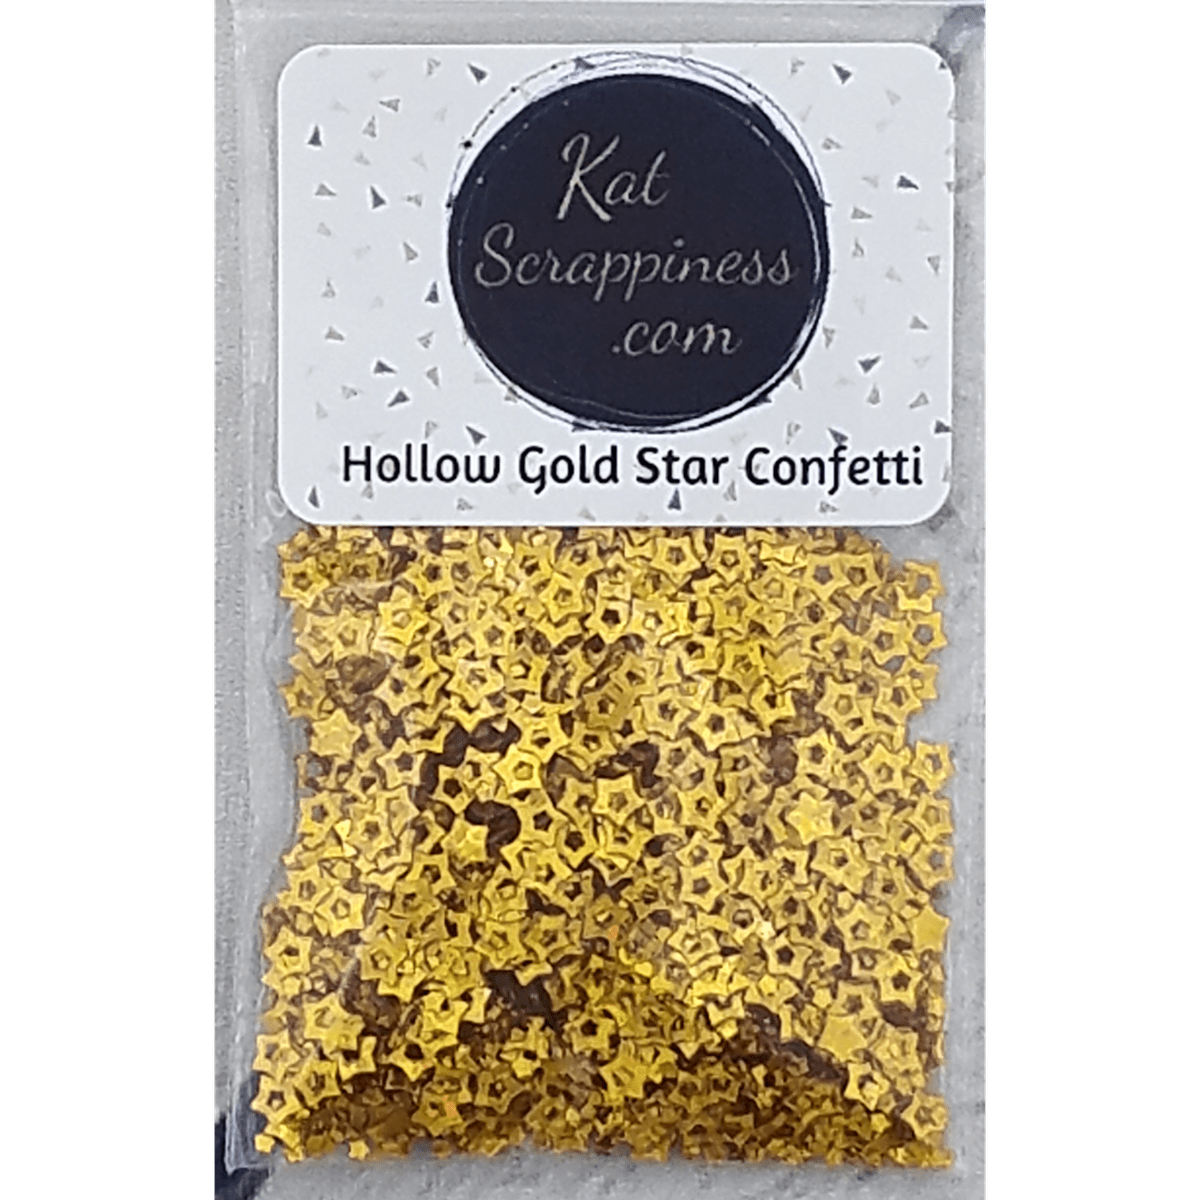 Hollow Gold Star Confetti Mix - Kat Scrappiness